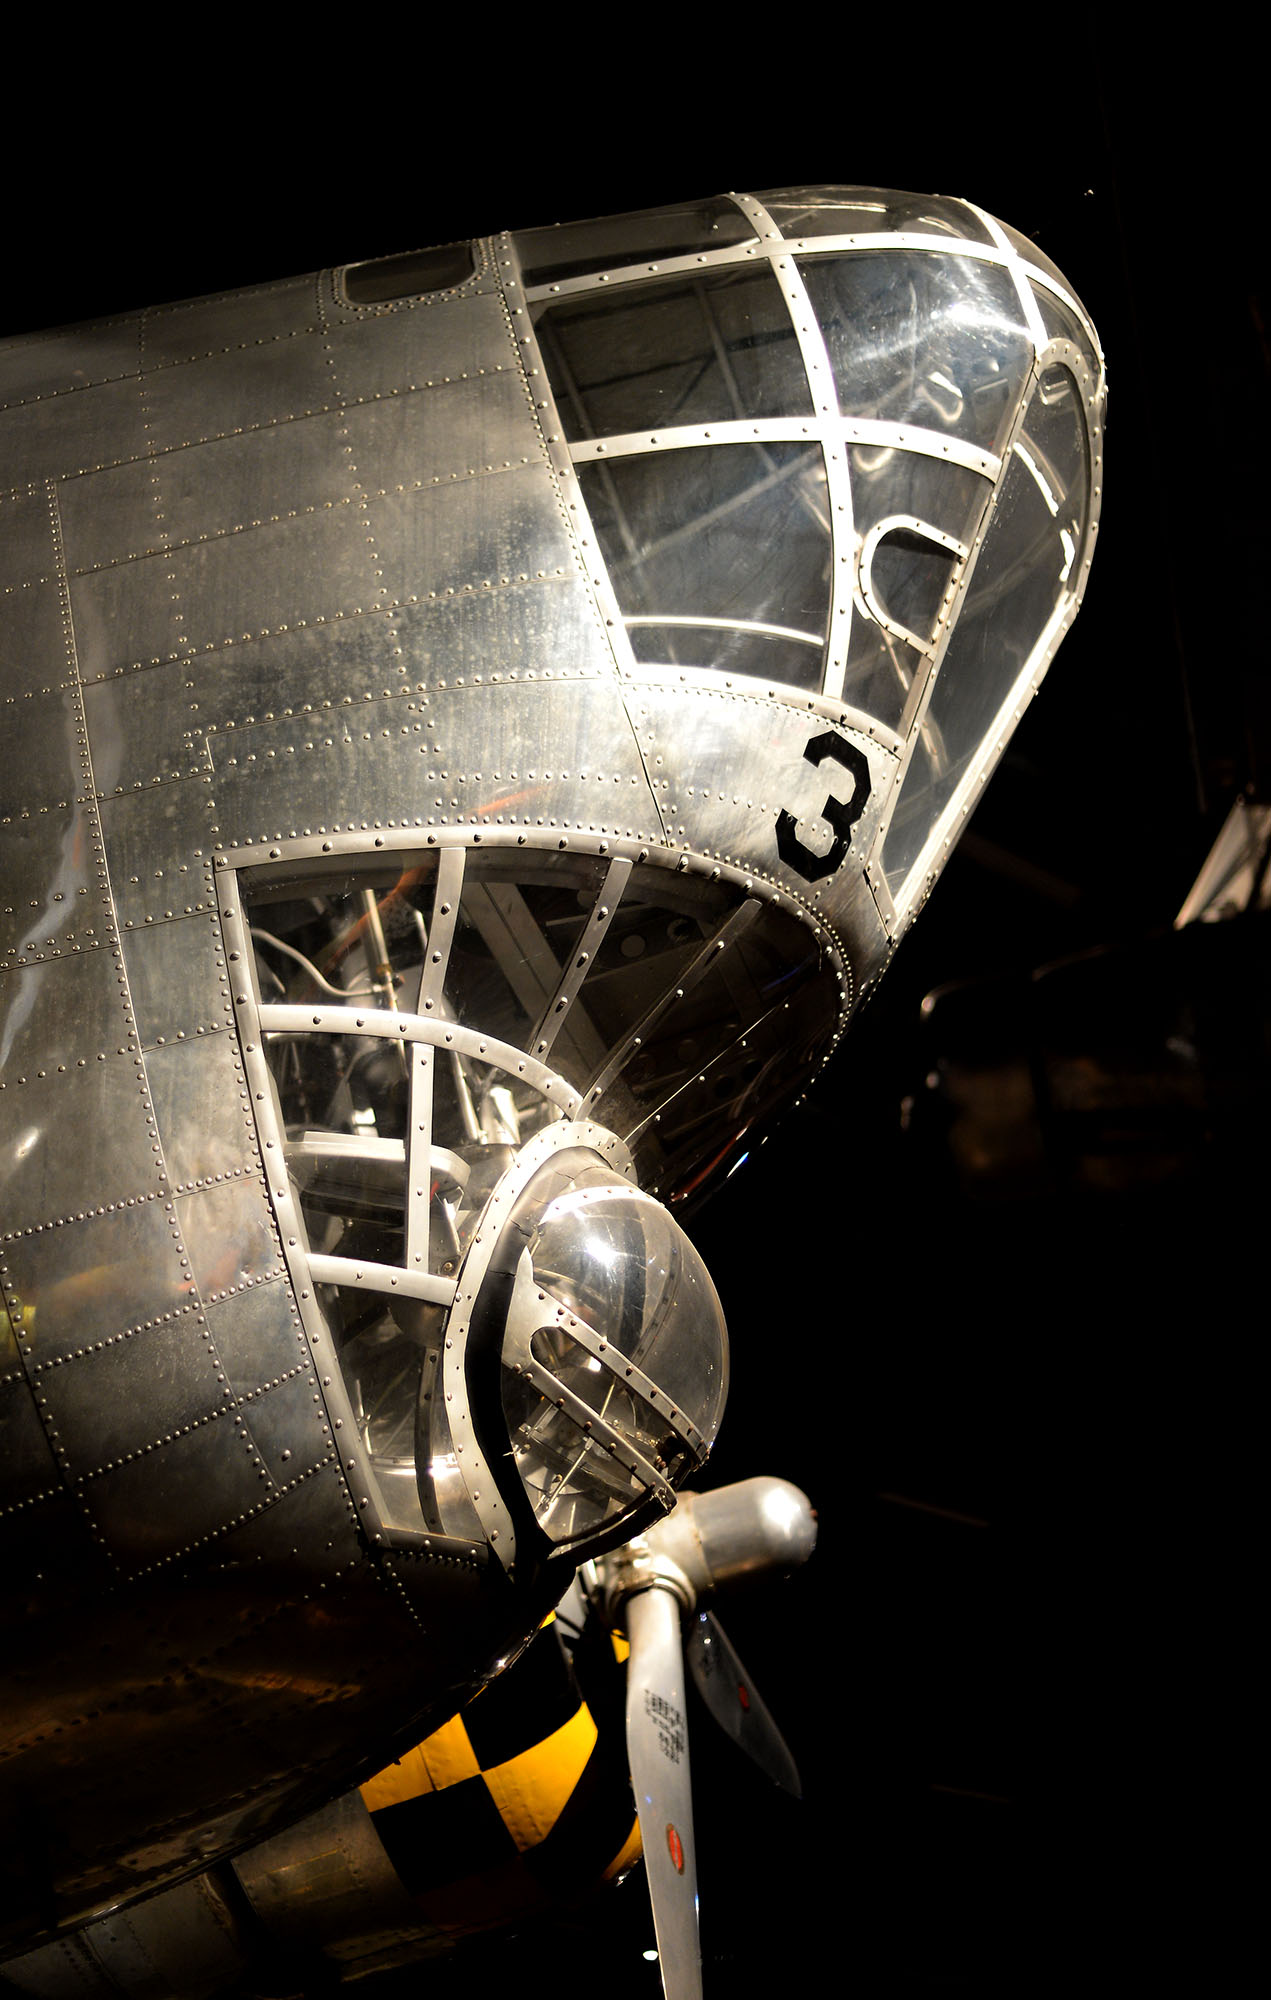 Close-up of the nose of the B-18 bomber on display at the National Museum of the United States Air Force, Dayton, Ohio, United States, 27 Jun 2014